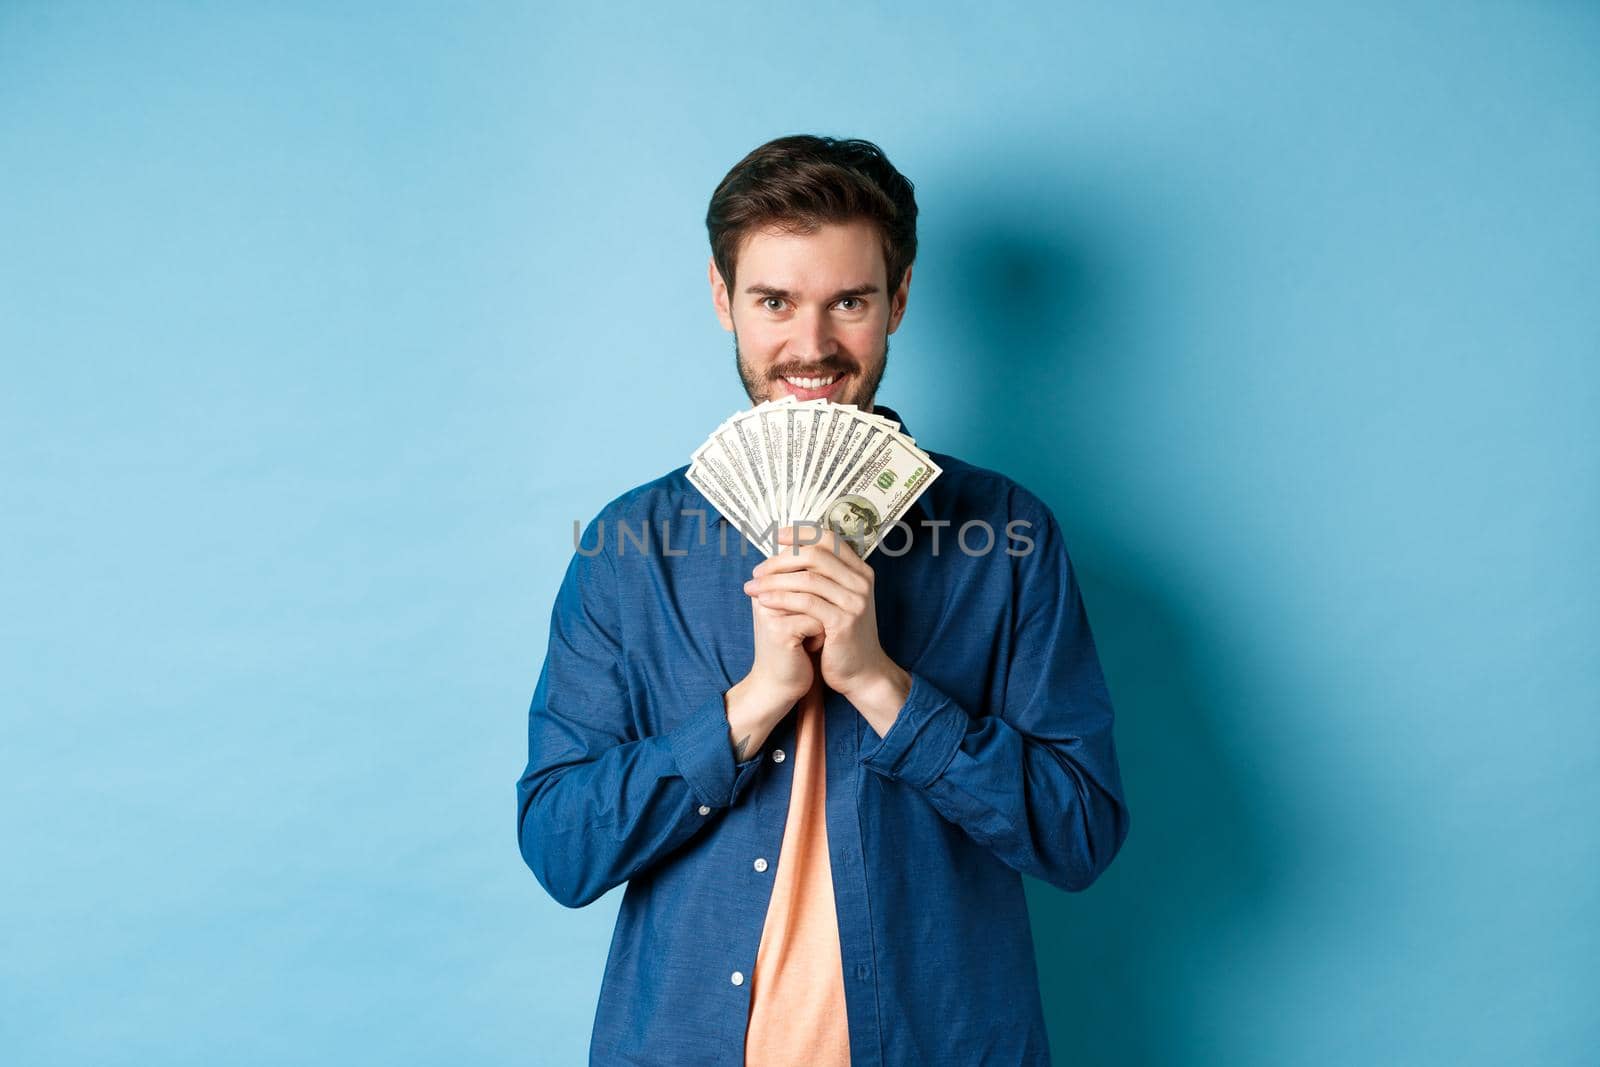 Happy smiling man holding money and looking at camera pensive, thinking of shopping, standing on blue background.